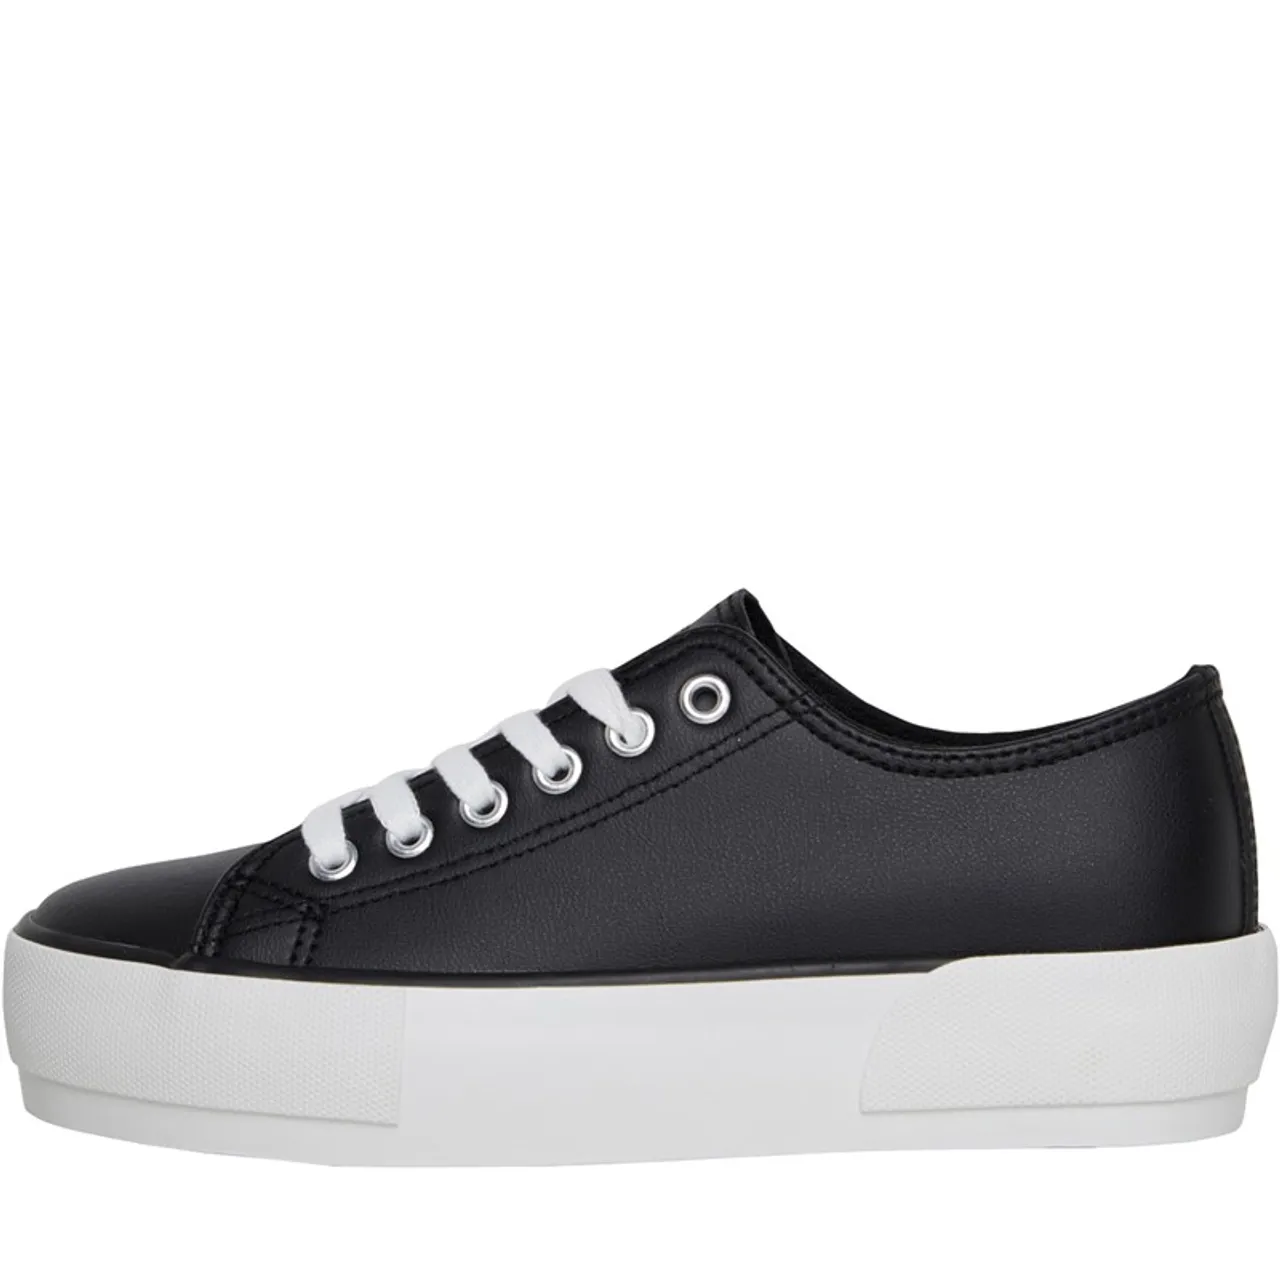 Loyalty And Faith Womens Millie PU Trainers Black/White